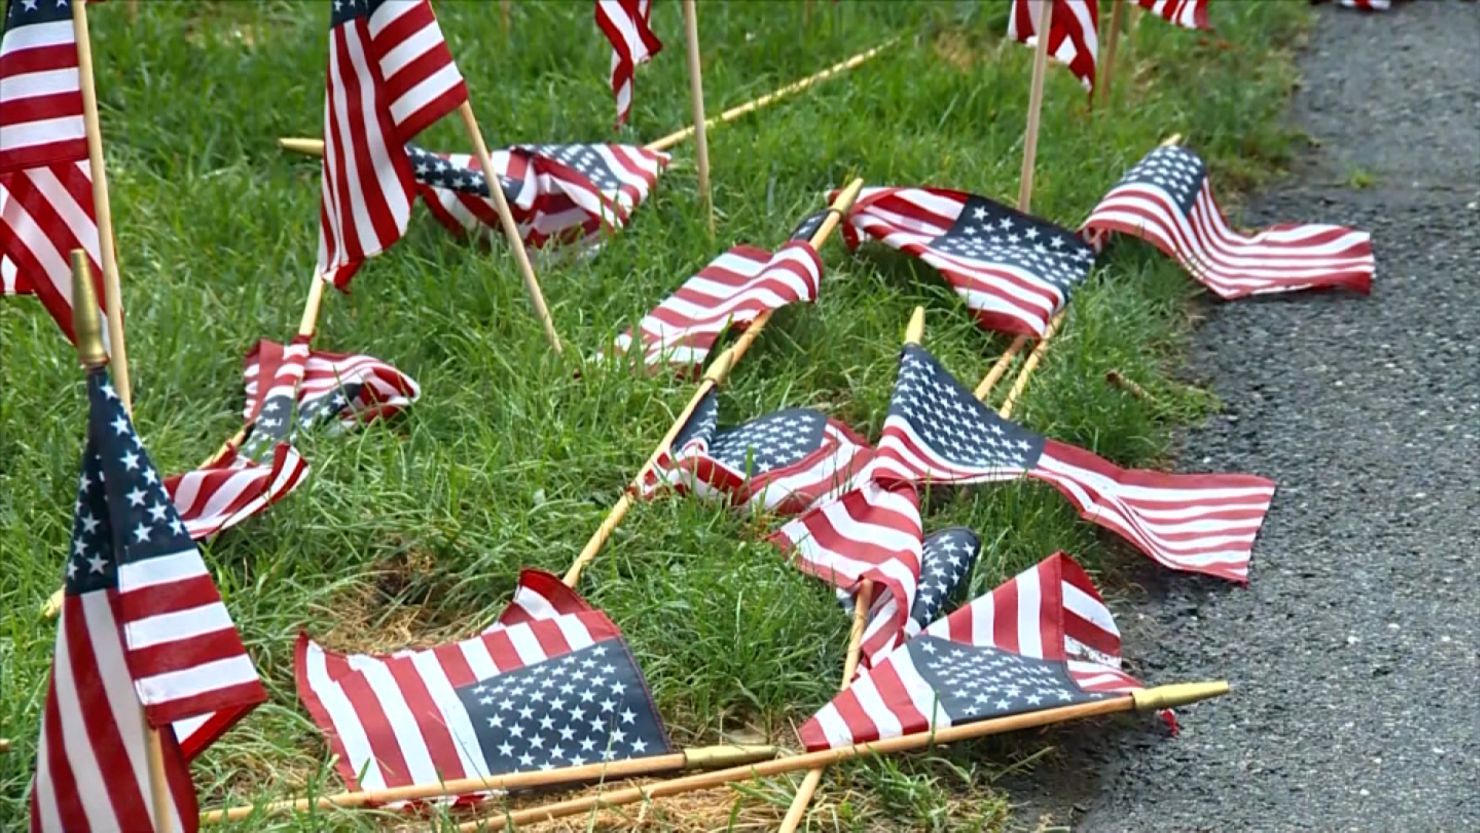 The flags were "planted" by a nonprofit that develops leadership skills in young people